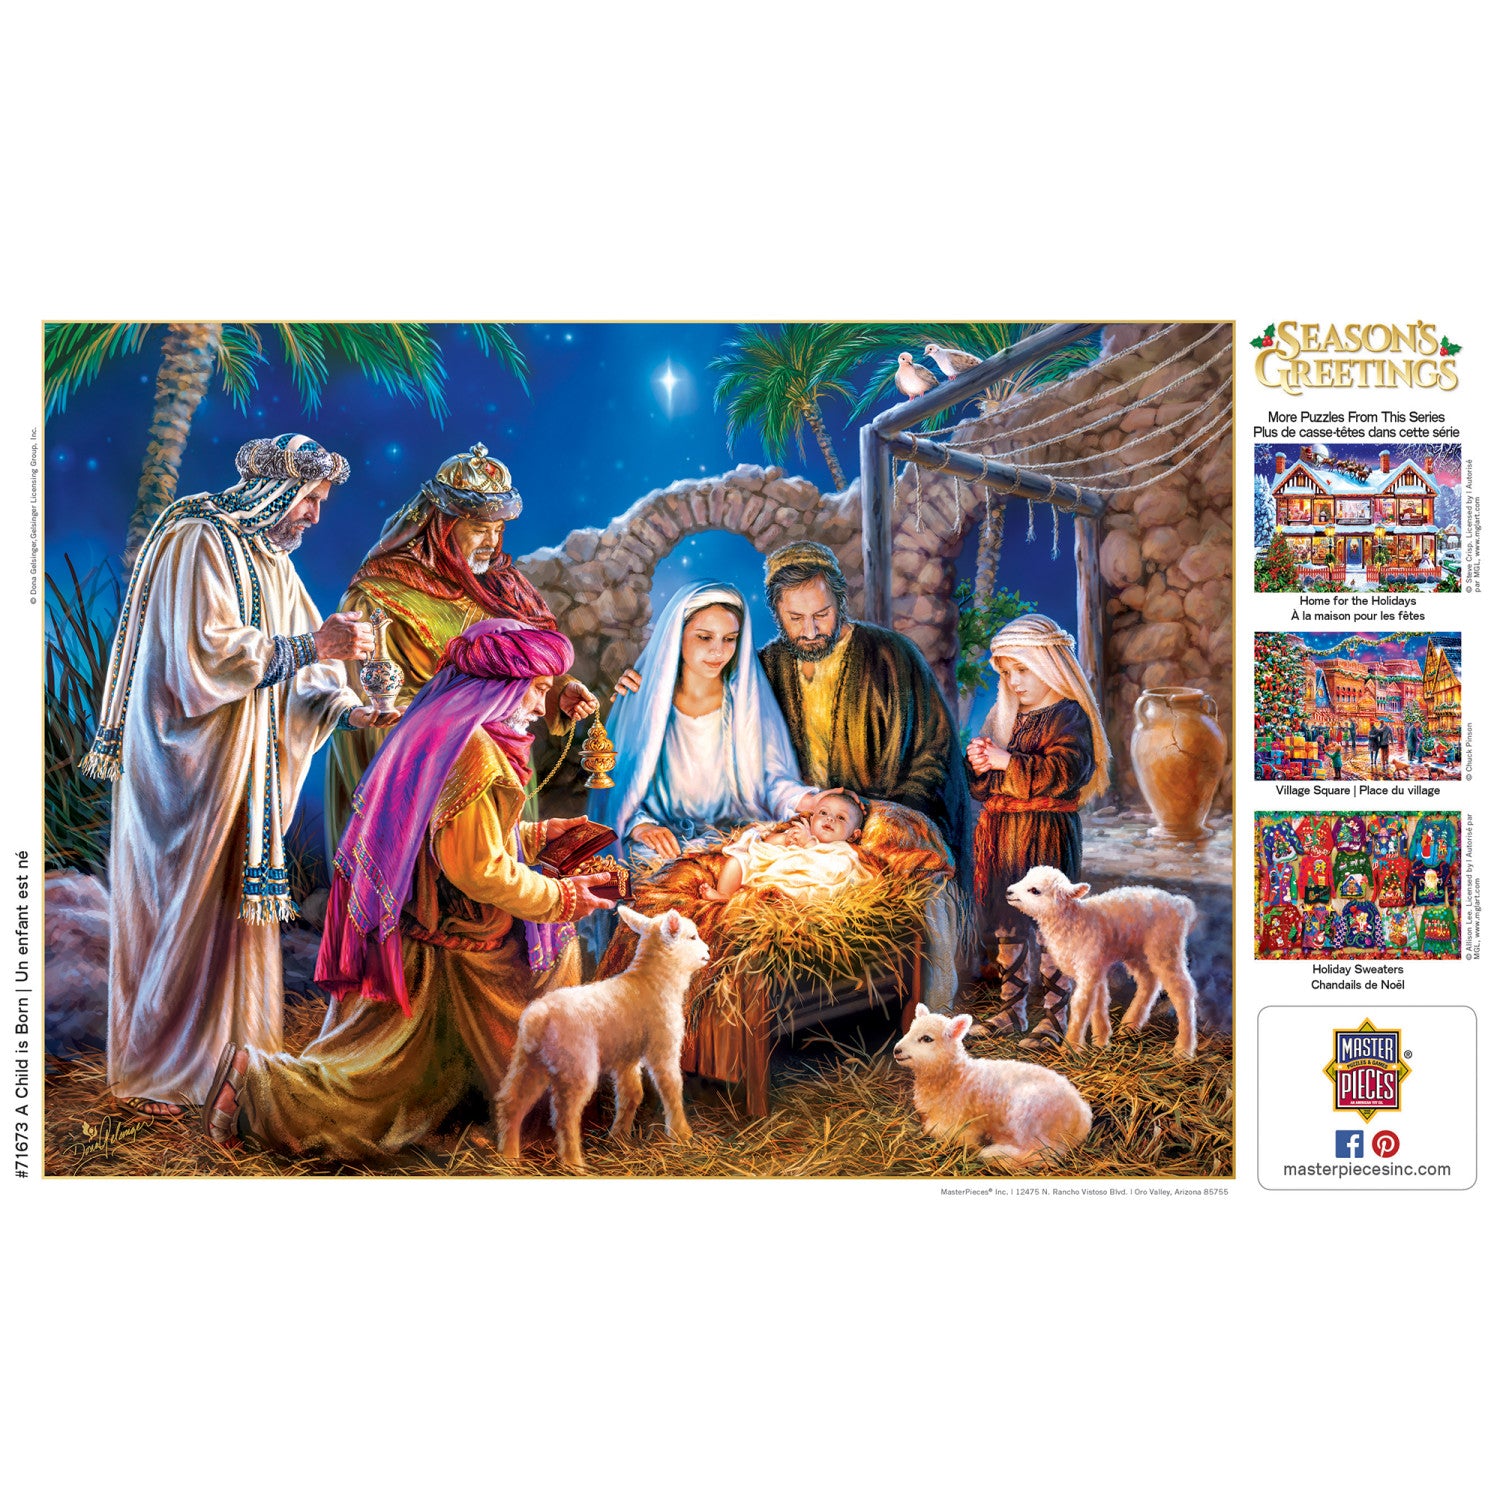 Season's Greetings - A Child is Born 1000 Piece Puzzle